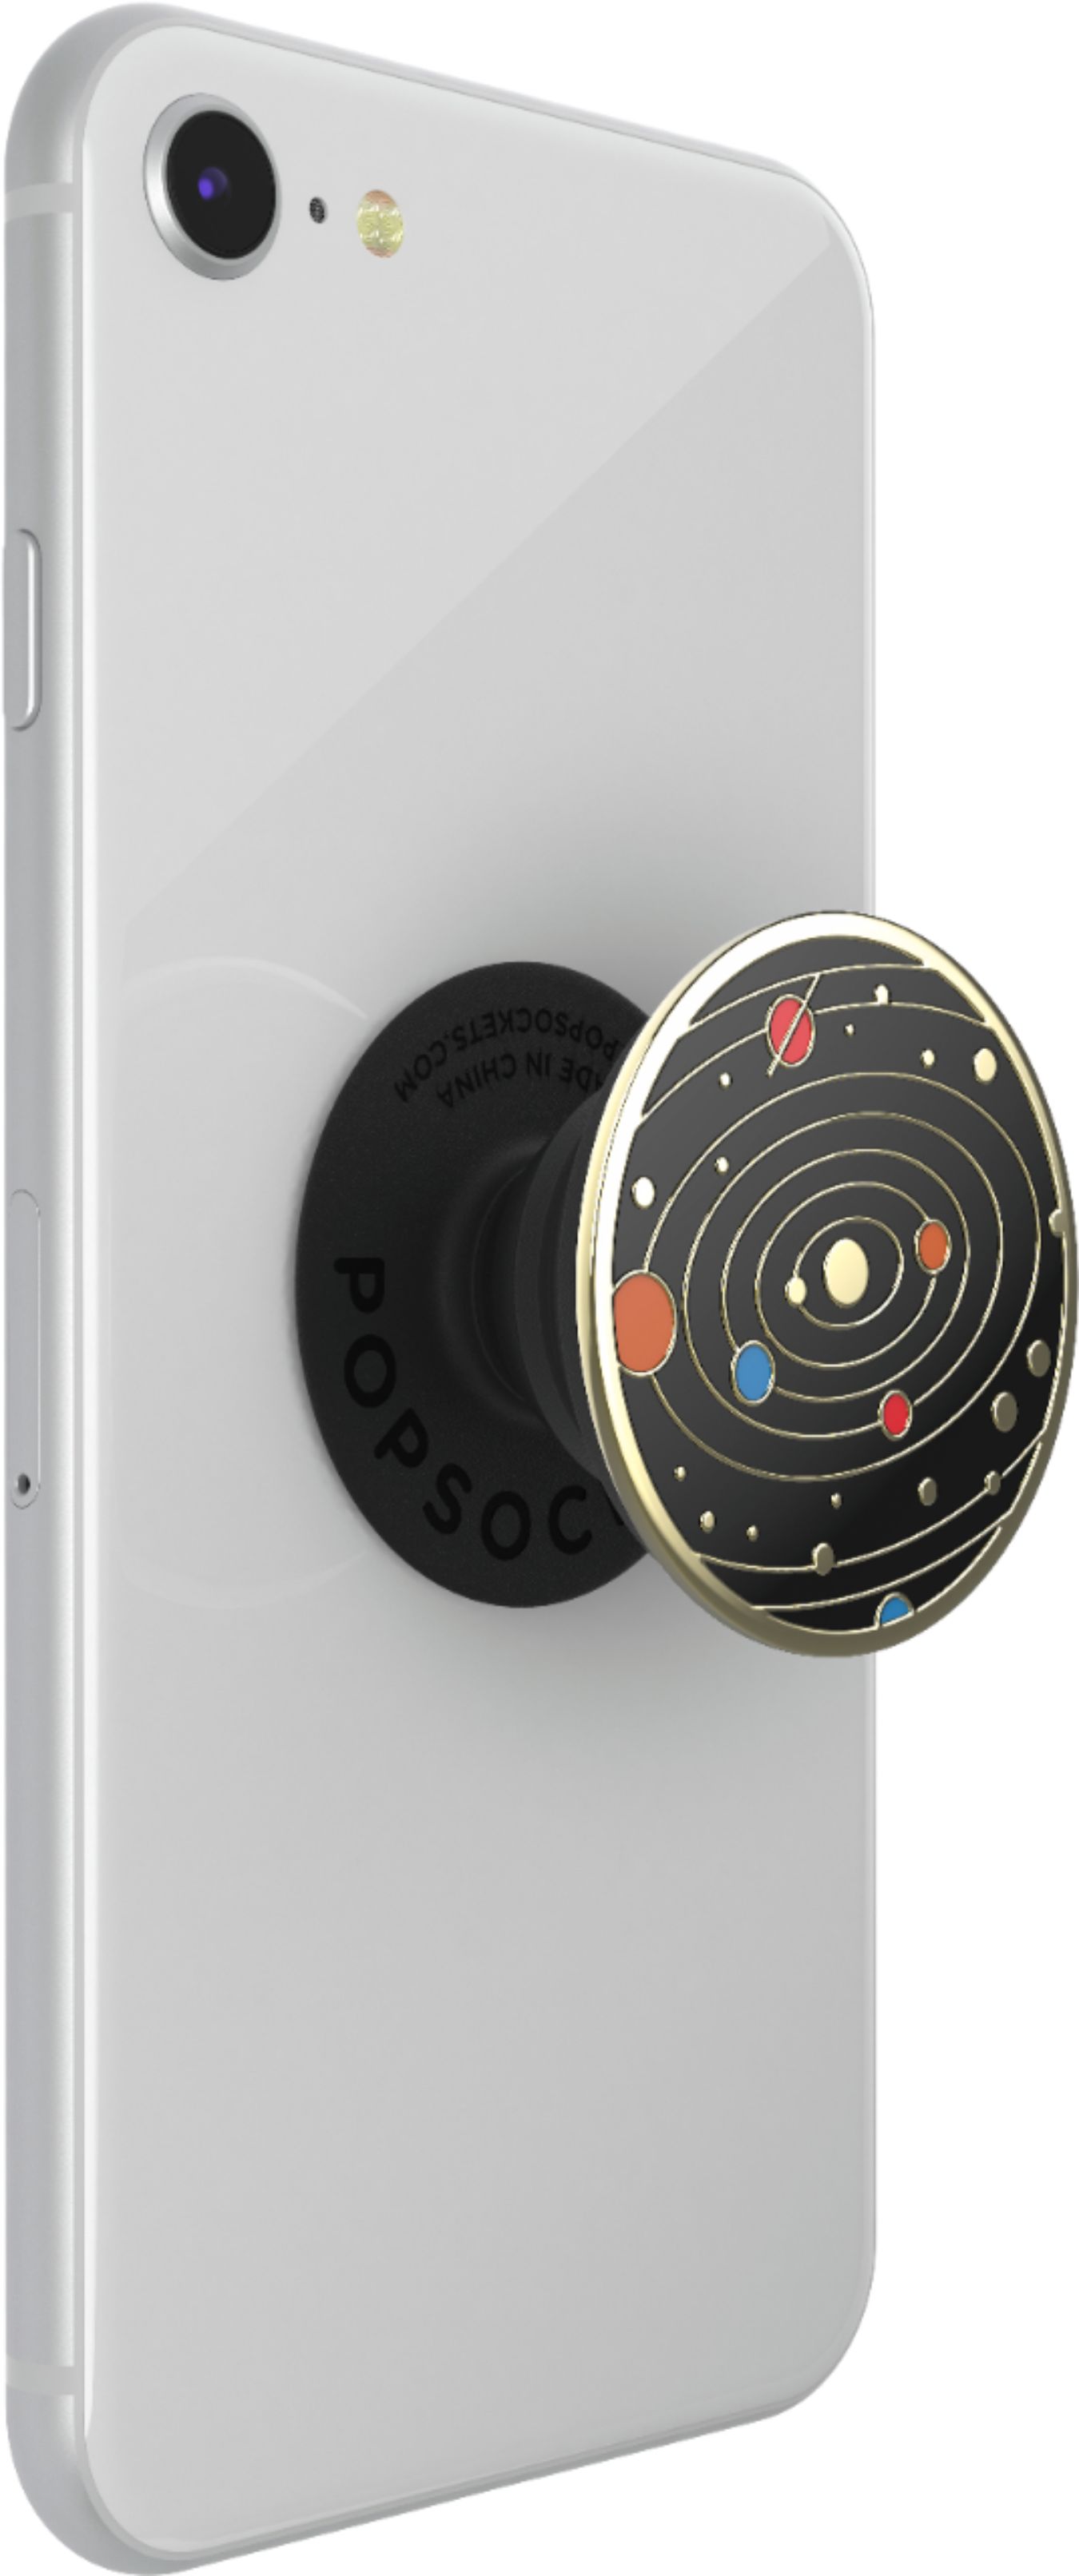 PopSockets PopGrip Premium Cell Phone Grip & Stand Enamel Solar Flare  801503 - Best Buy